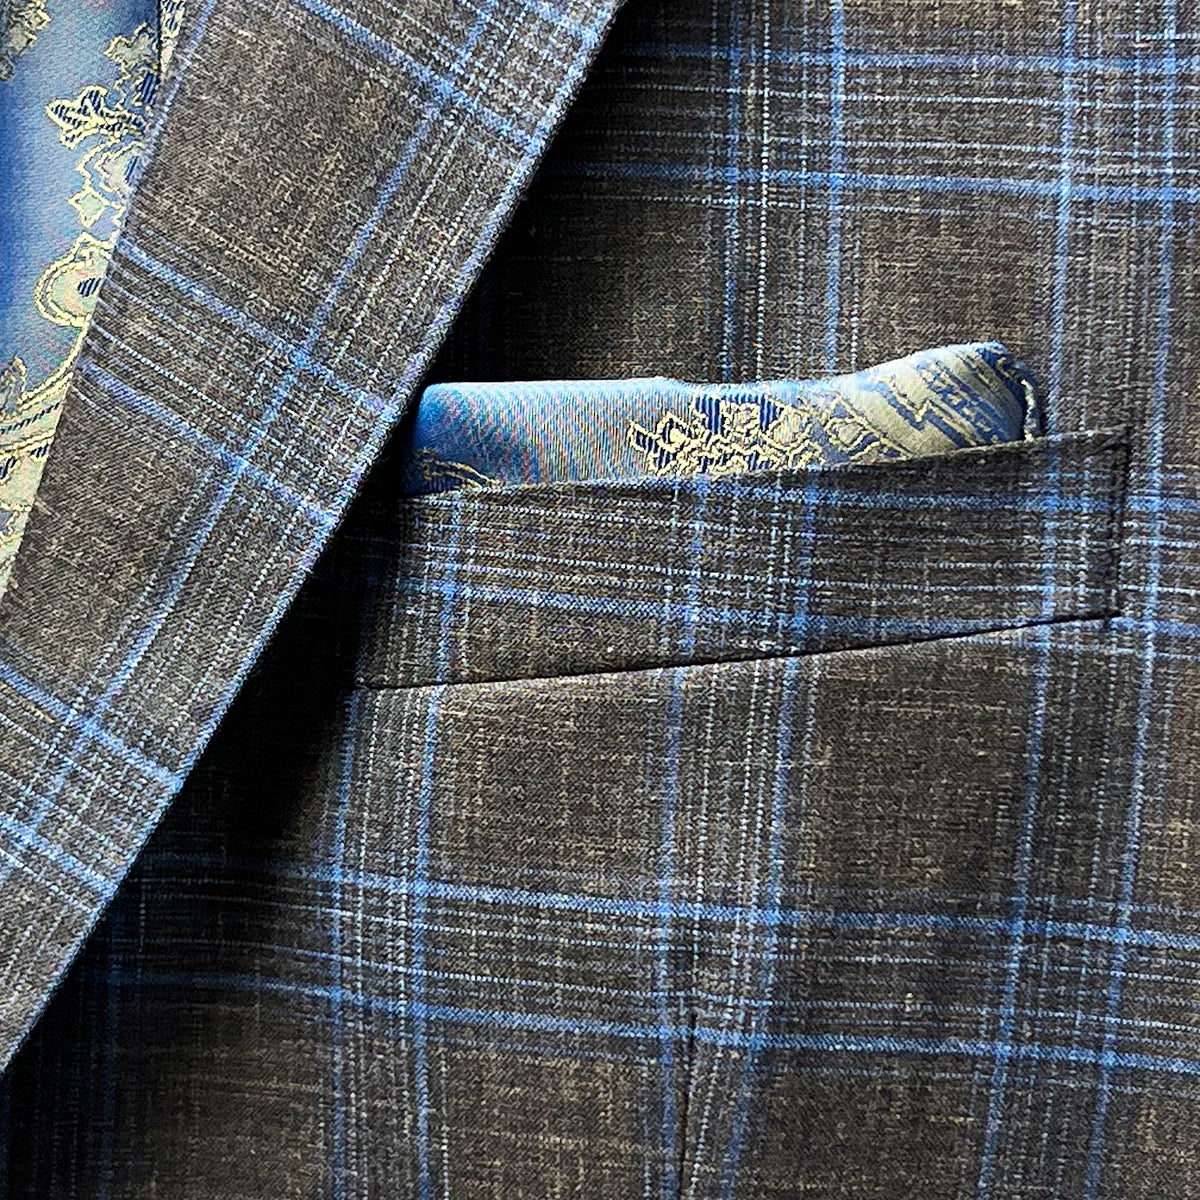 View of the built-in pocket square on the sportcoat, adding a stylish touch.